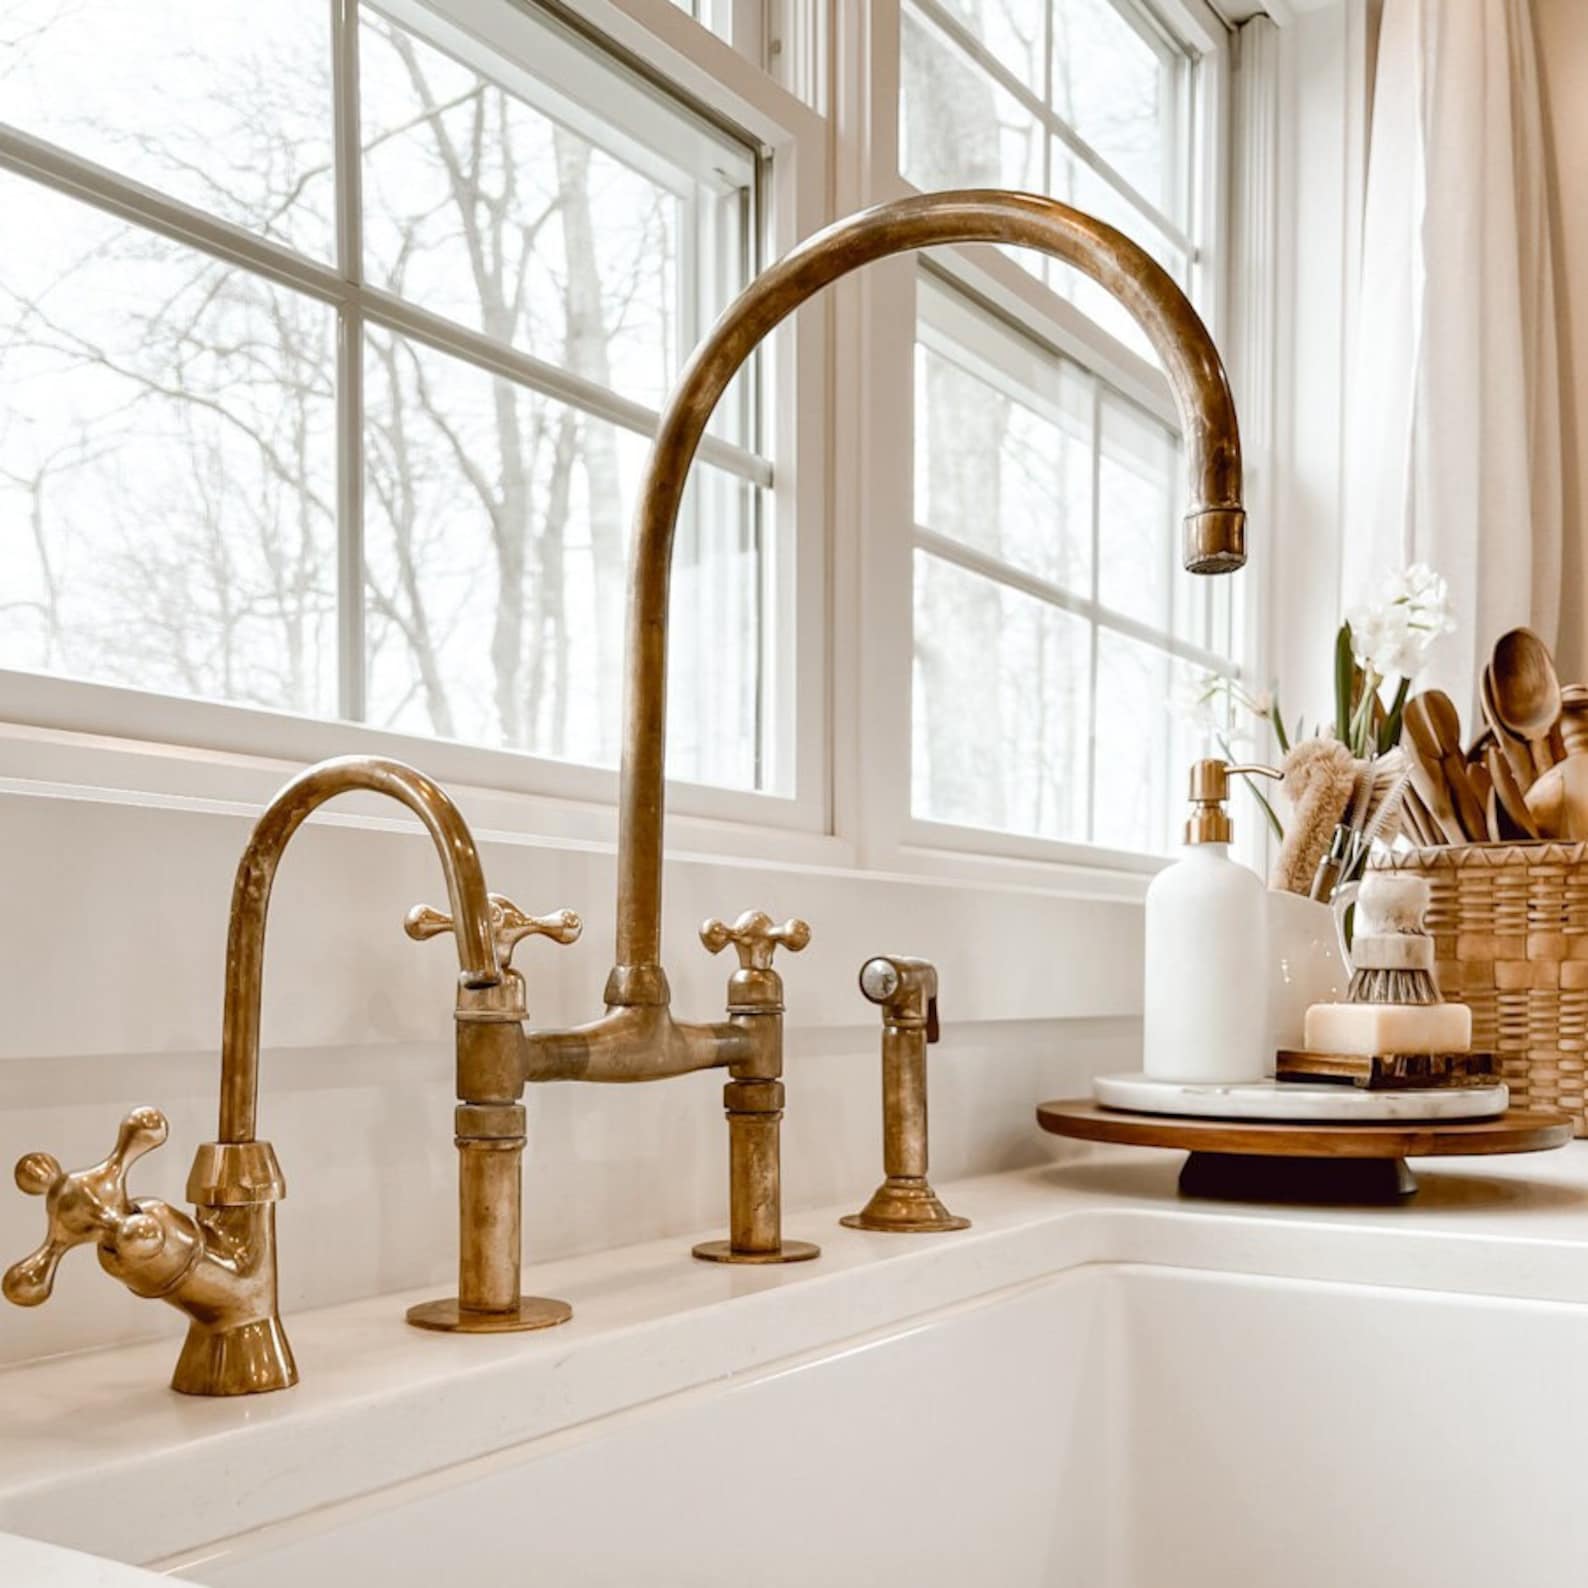 Unlacquered Brass Kitchen Faucet, Solid Brass 8" Bridge faucet with Cross Handles and Straight Legs